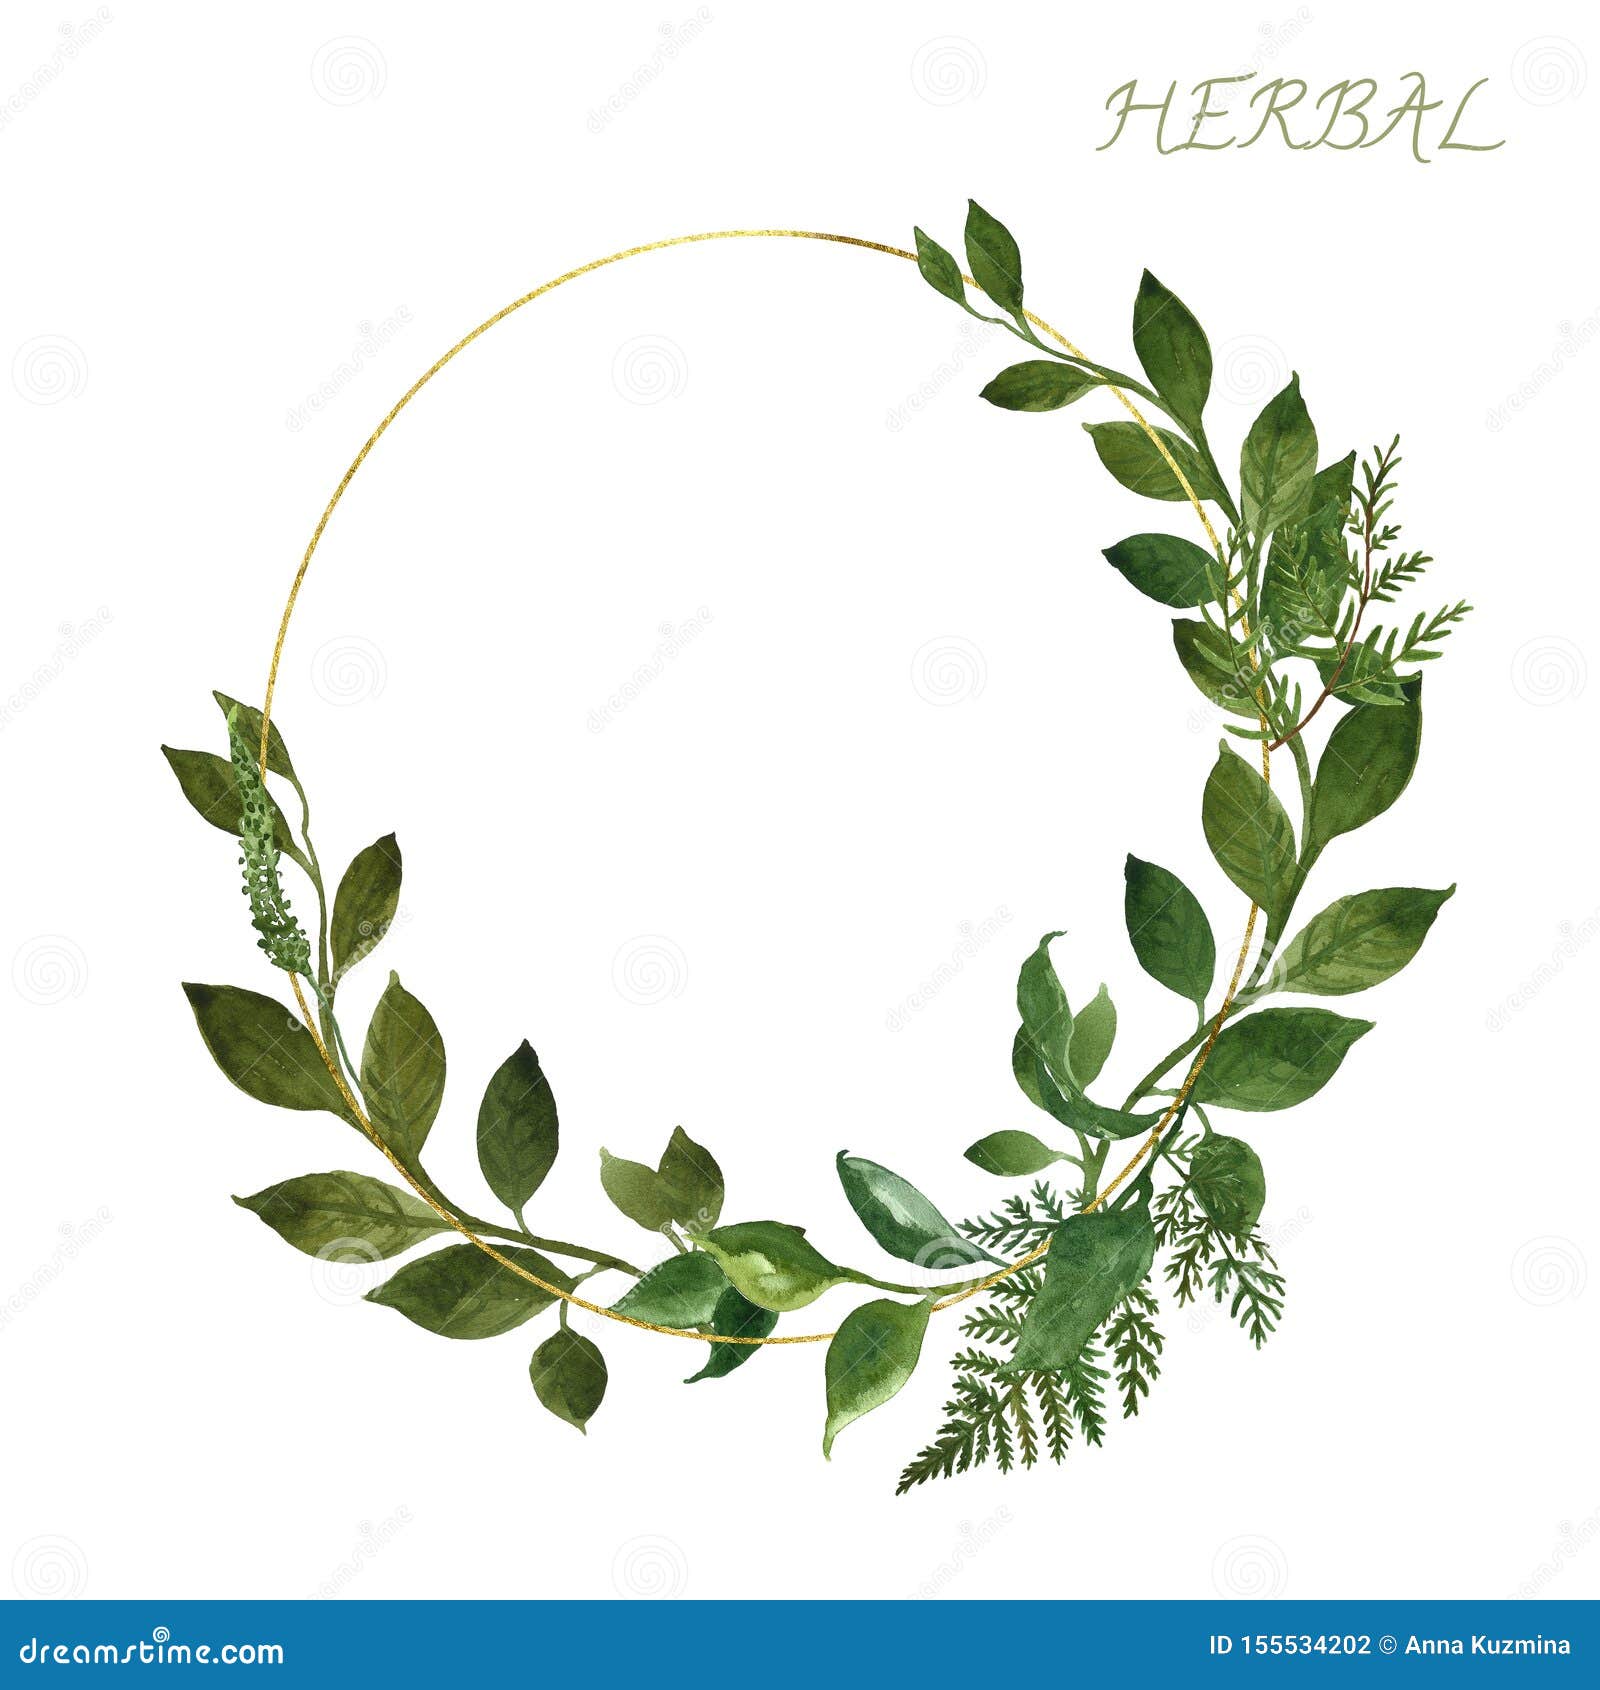 watercolor botanical golden frame with wild herbs and green leaves on white background. wedding invitation  template